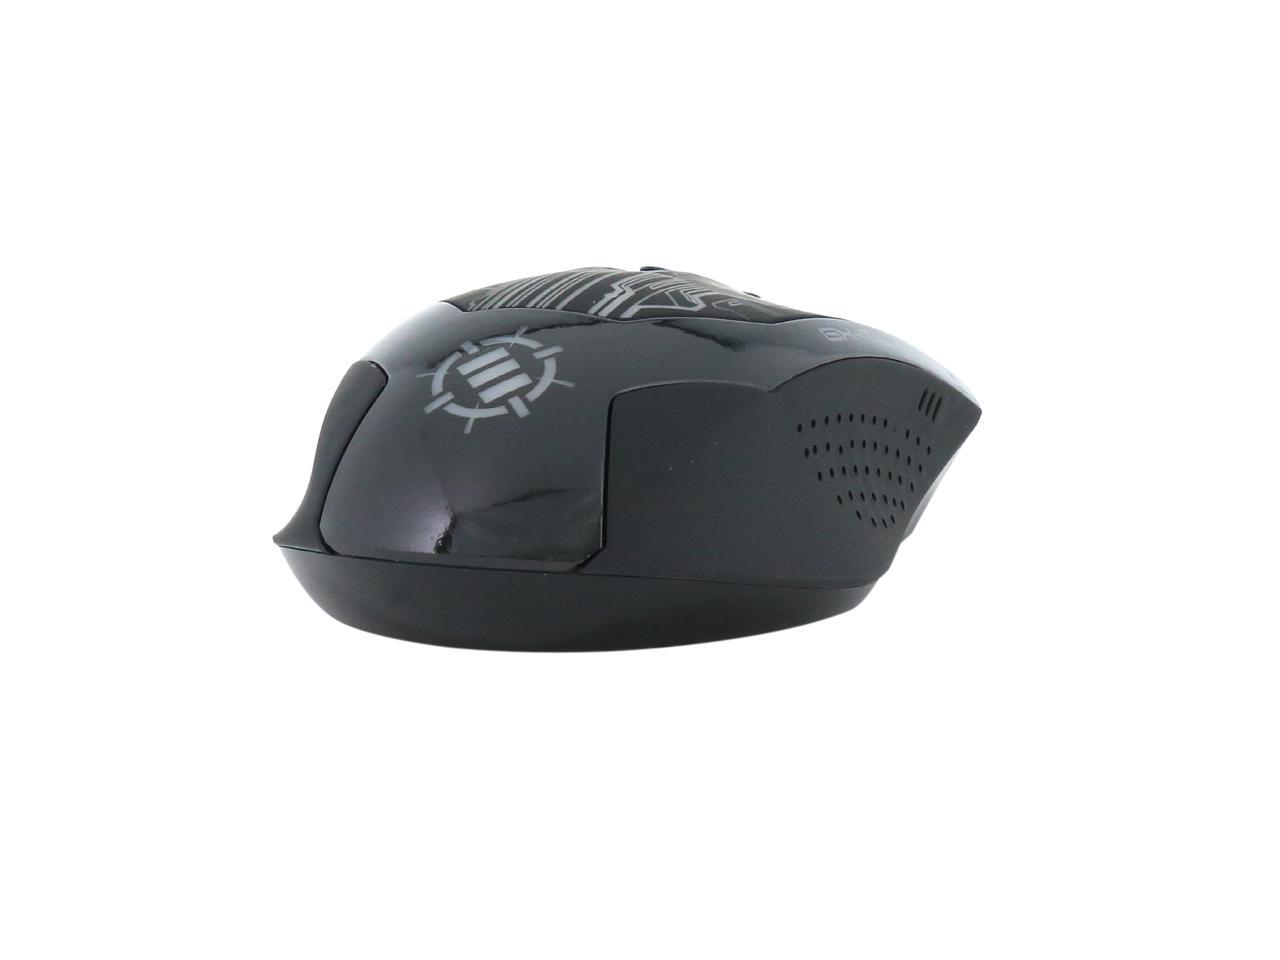 microsoft wireless mouse 3500 use rechargeable battery